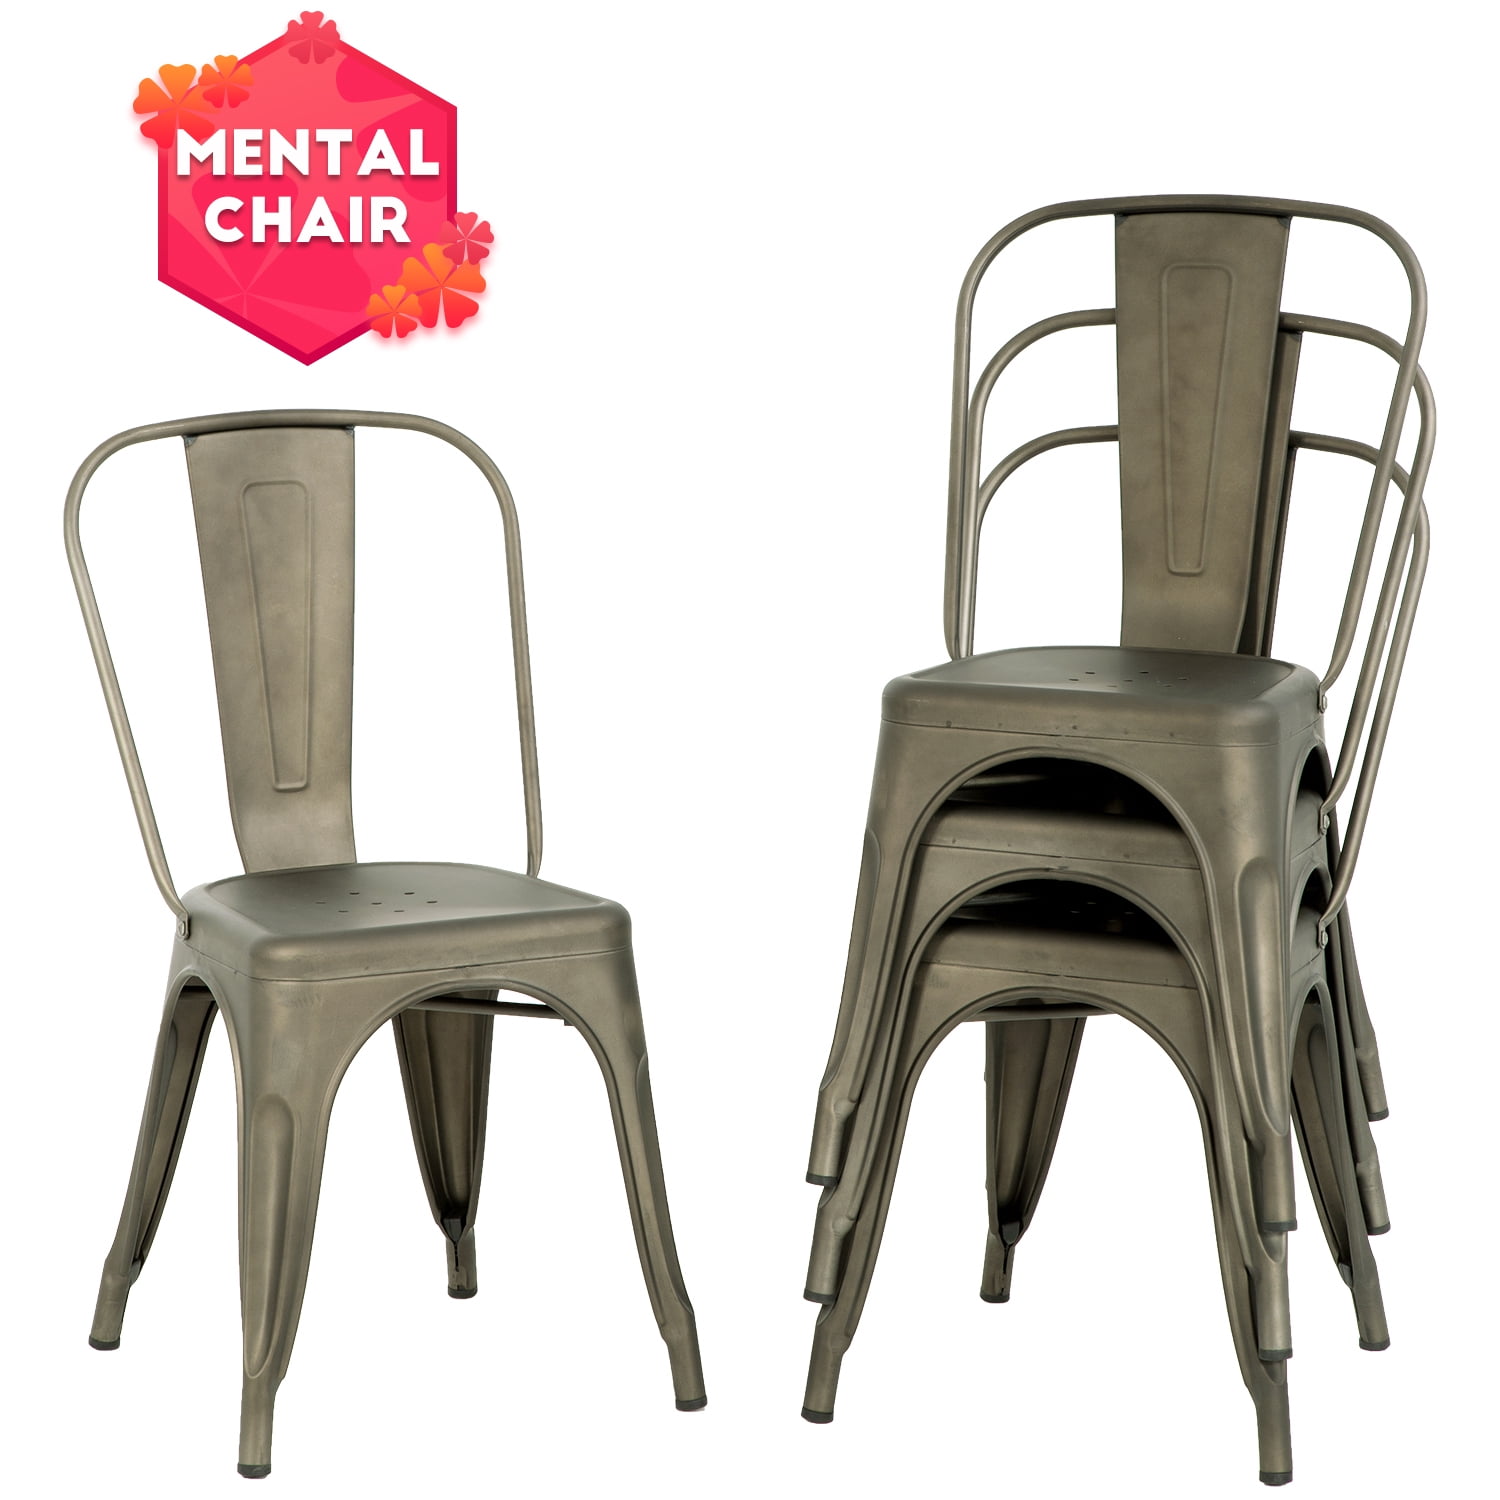 Stackable Chair Restaurant Chair Metal Chair Chic Metal Kitchen Dining Chairs Set Of 4 Trattoria Chairs Indoor Out Door Metal Tolix Side Bar Chairs Walmartcom Walmartcom